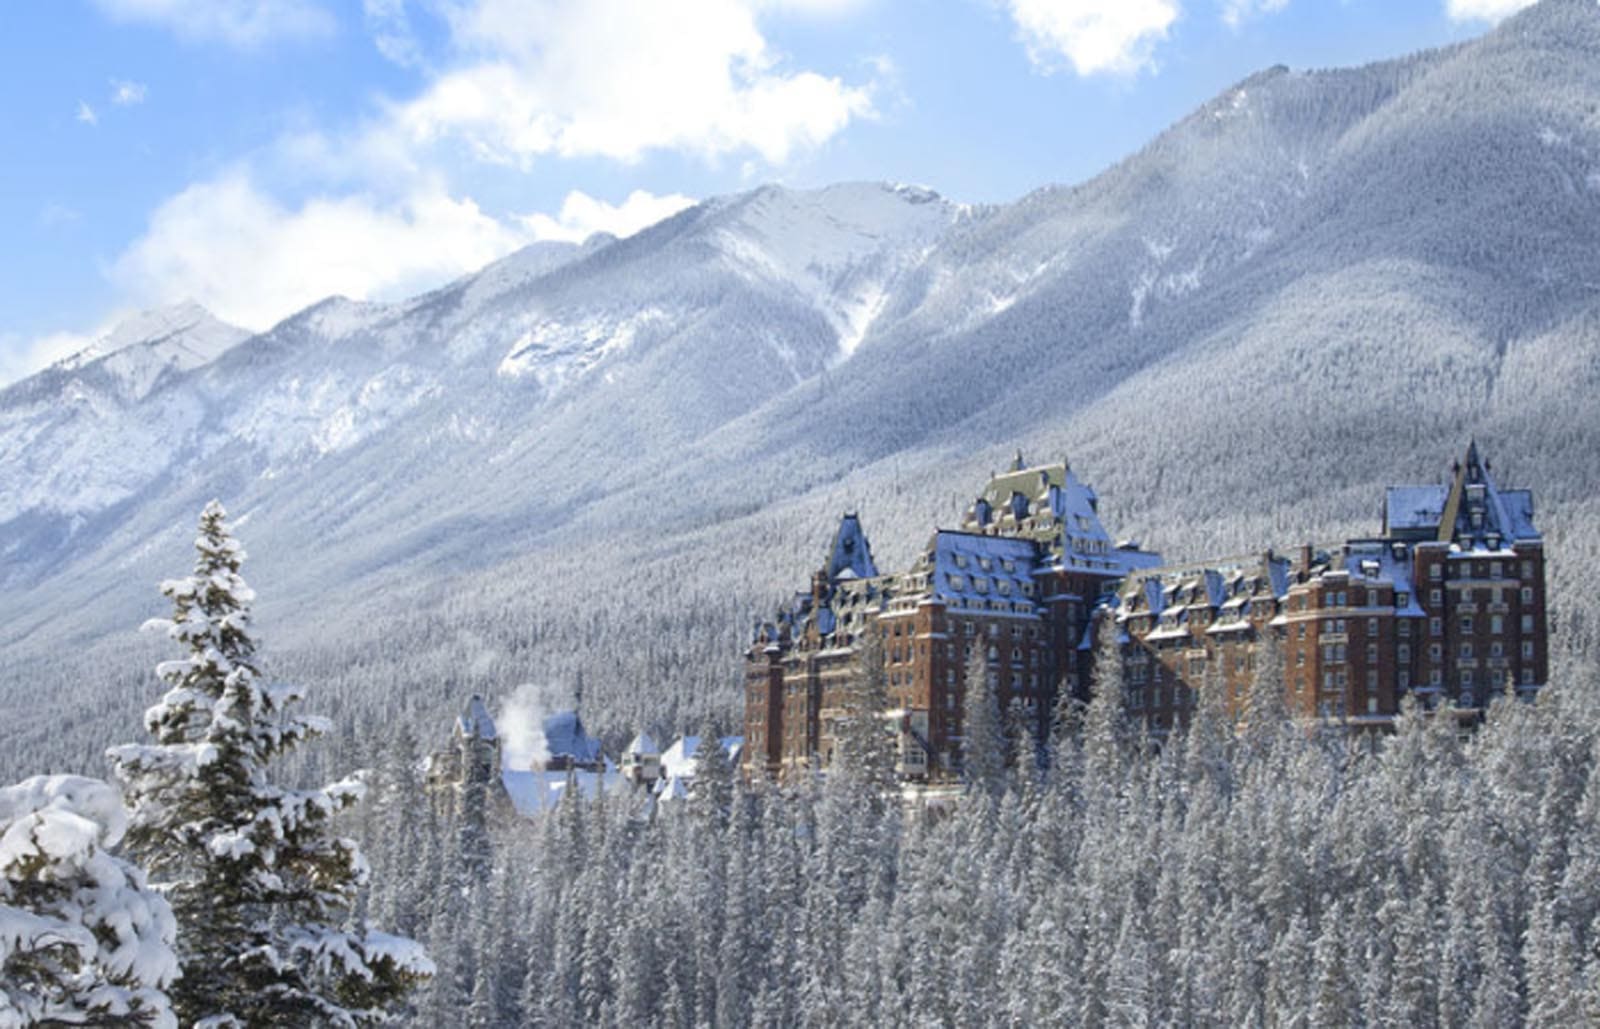 A mountainside view of Fairmont Springs in Banff ski resort